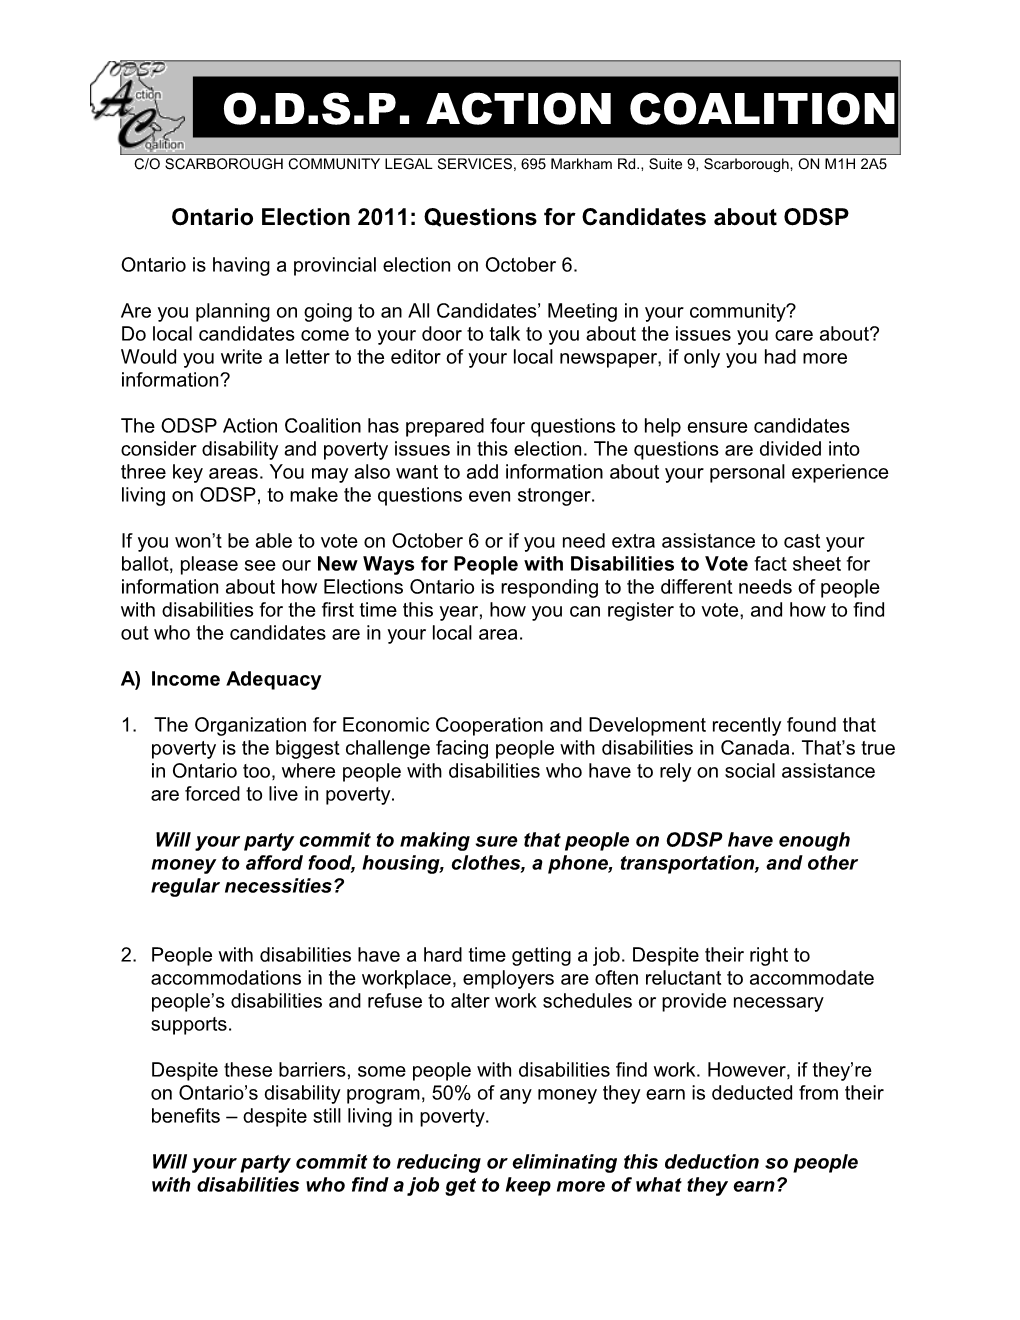 Ontario Election 2011: Questions for Candidates About ODSP